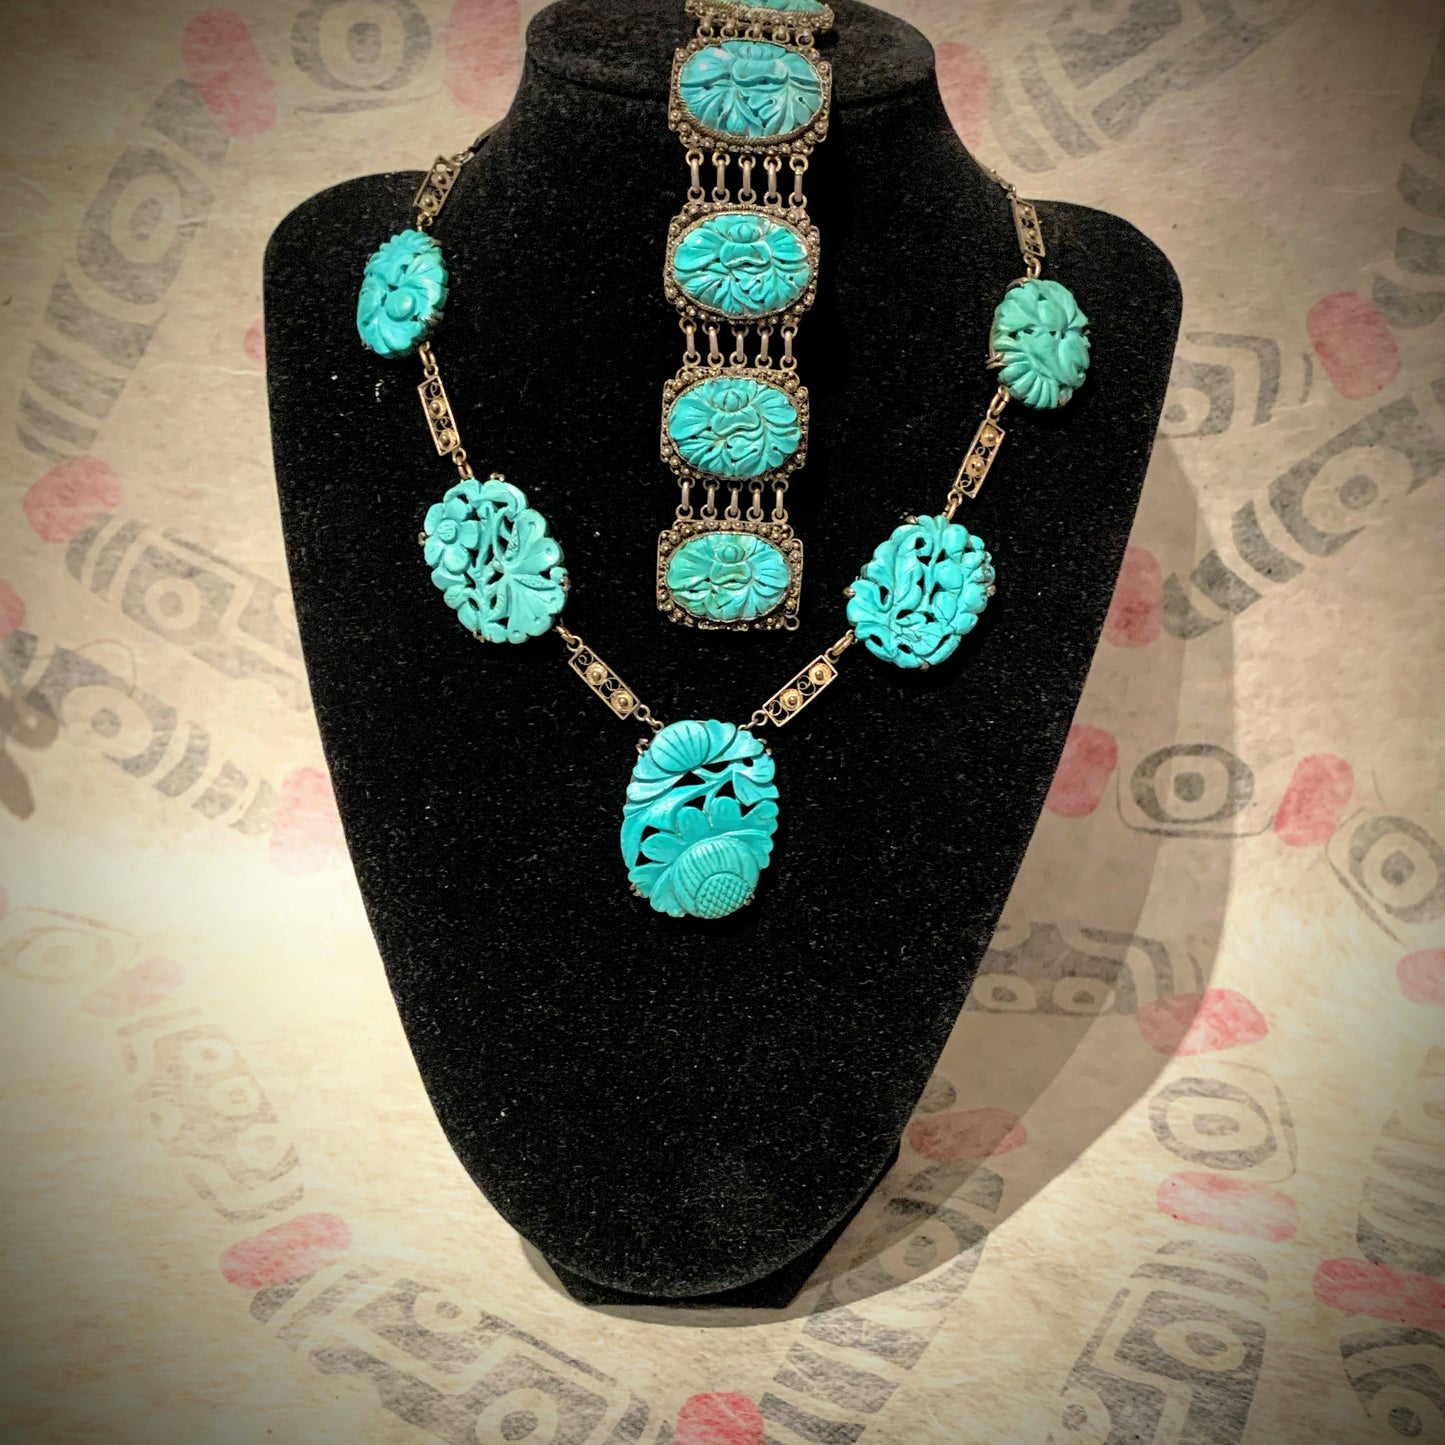 Vintage carved Turquoise jewelry set